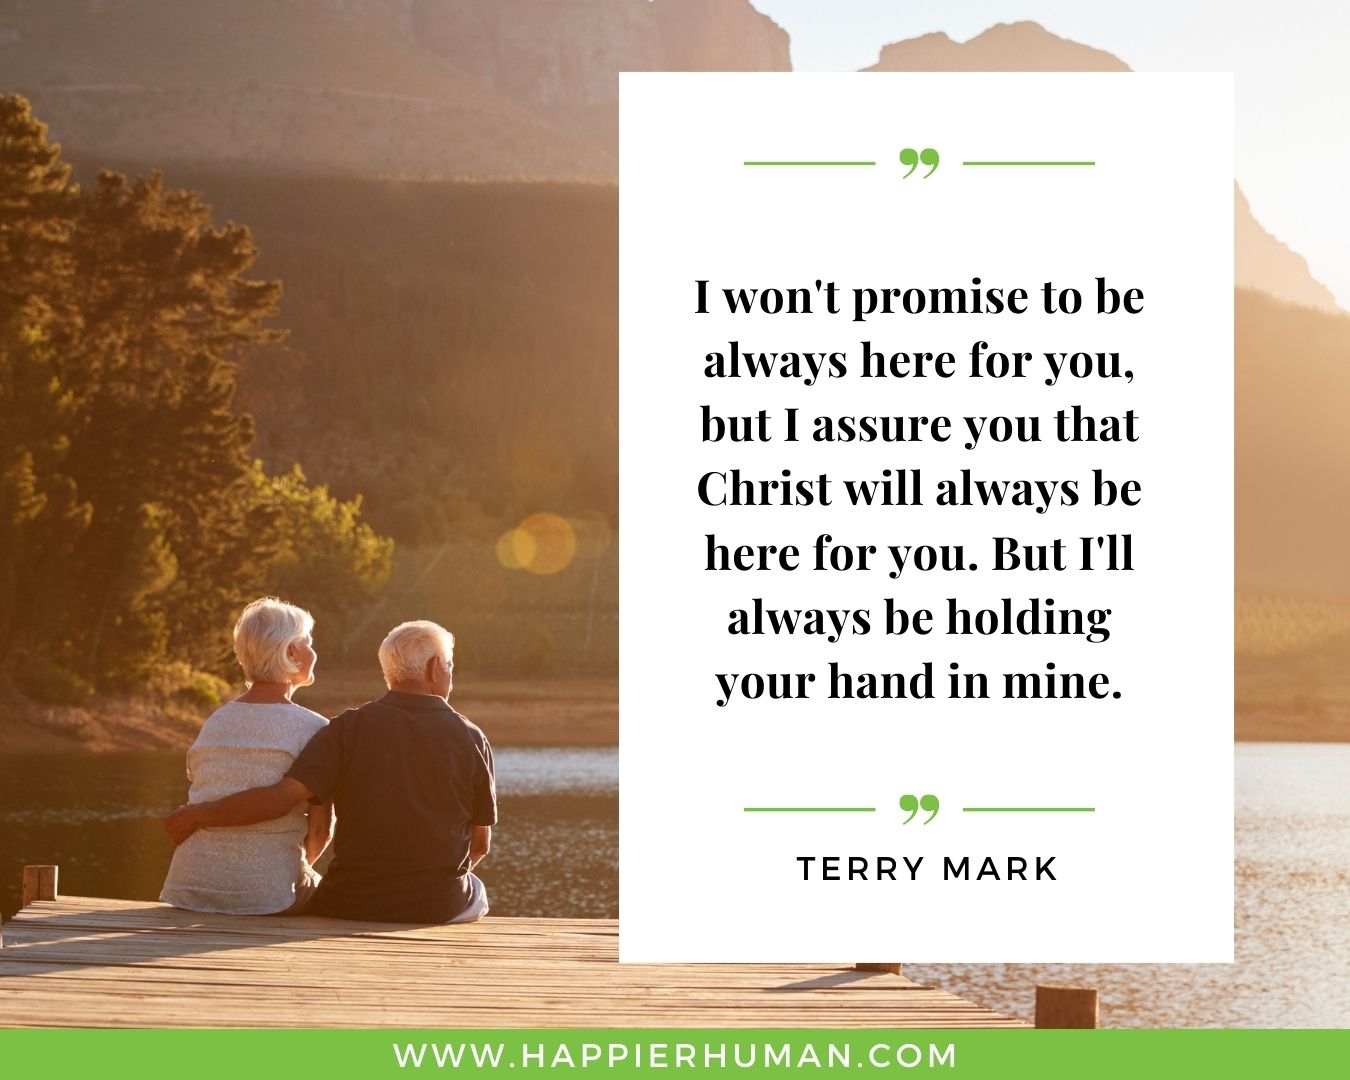 I’m Here for You Quotes - “I won't promise to be always here for you, but I assure you that Christ will always be here for you. But I'll always be holding your hand in mine.” – Terry Mark